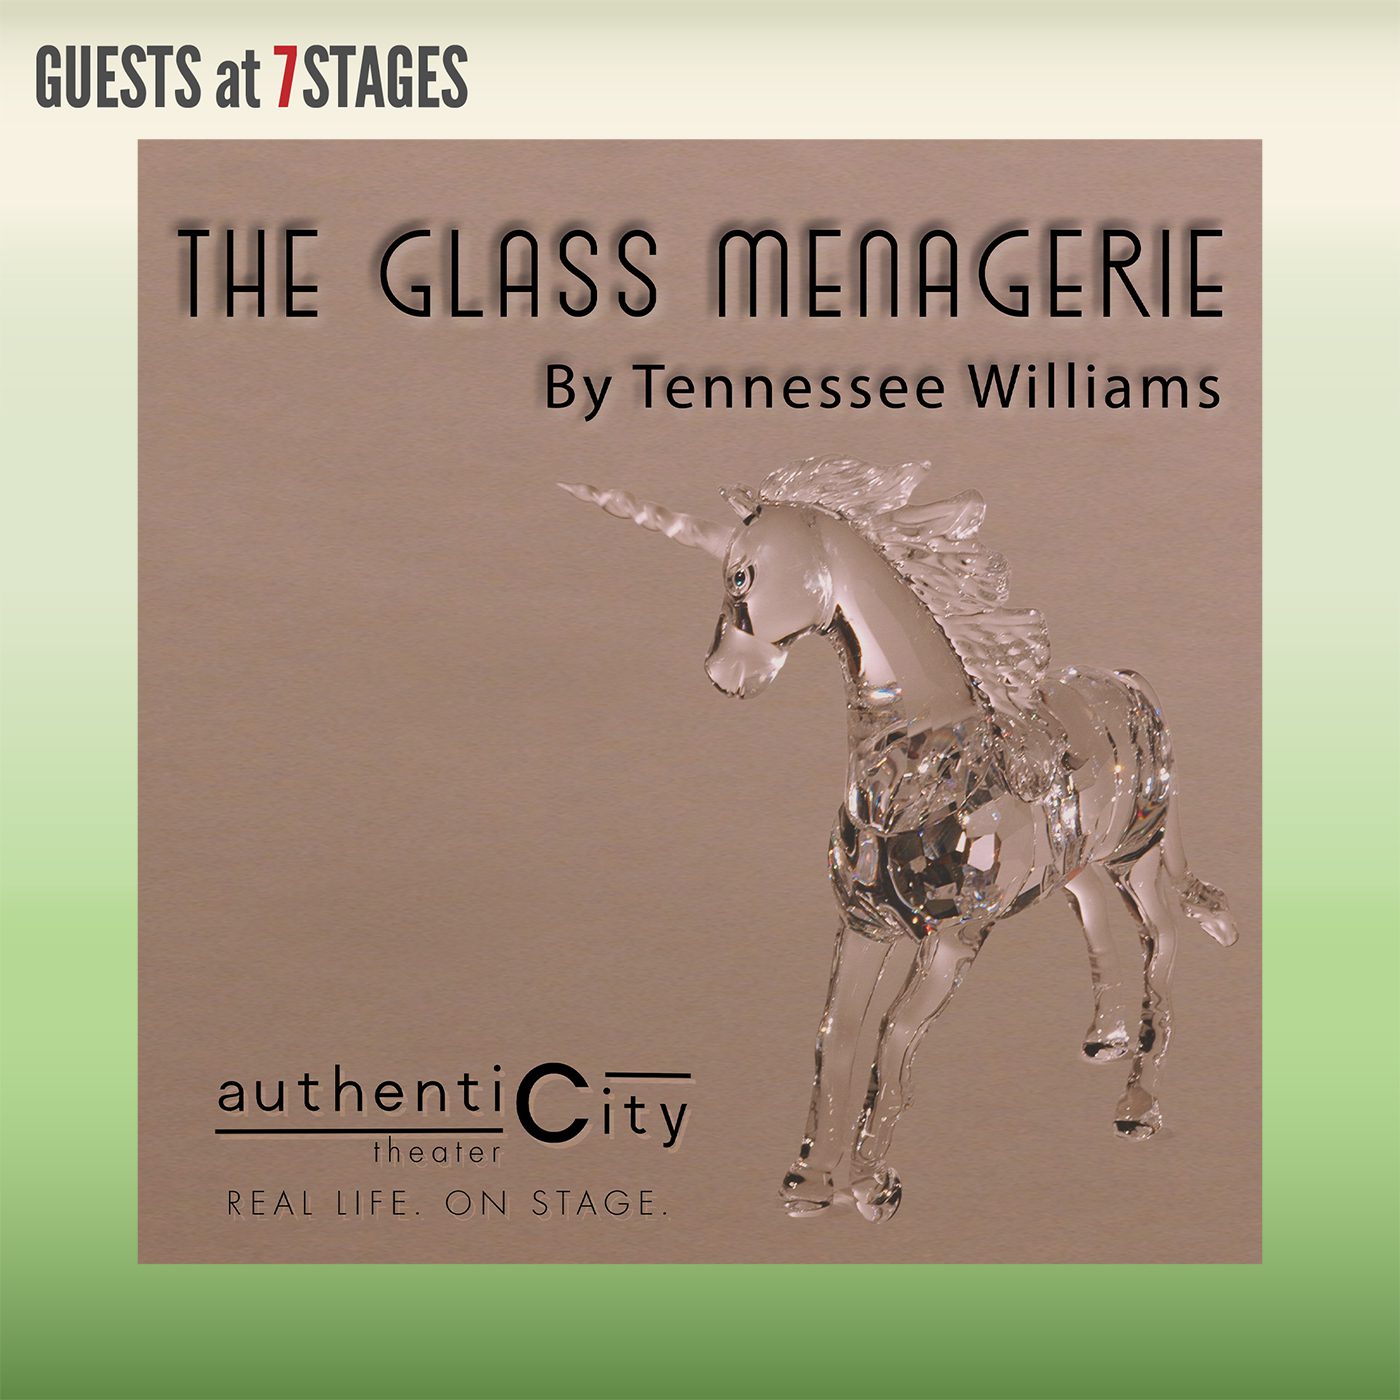 The Glass Menagerie by Tennessee Williams. Authenticity Theater. Real Life. On stage.